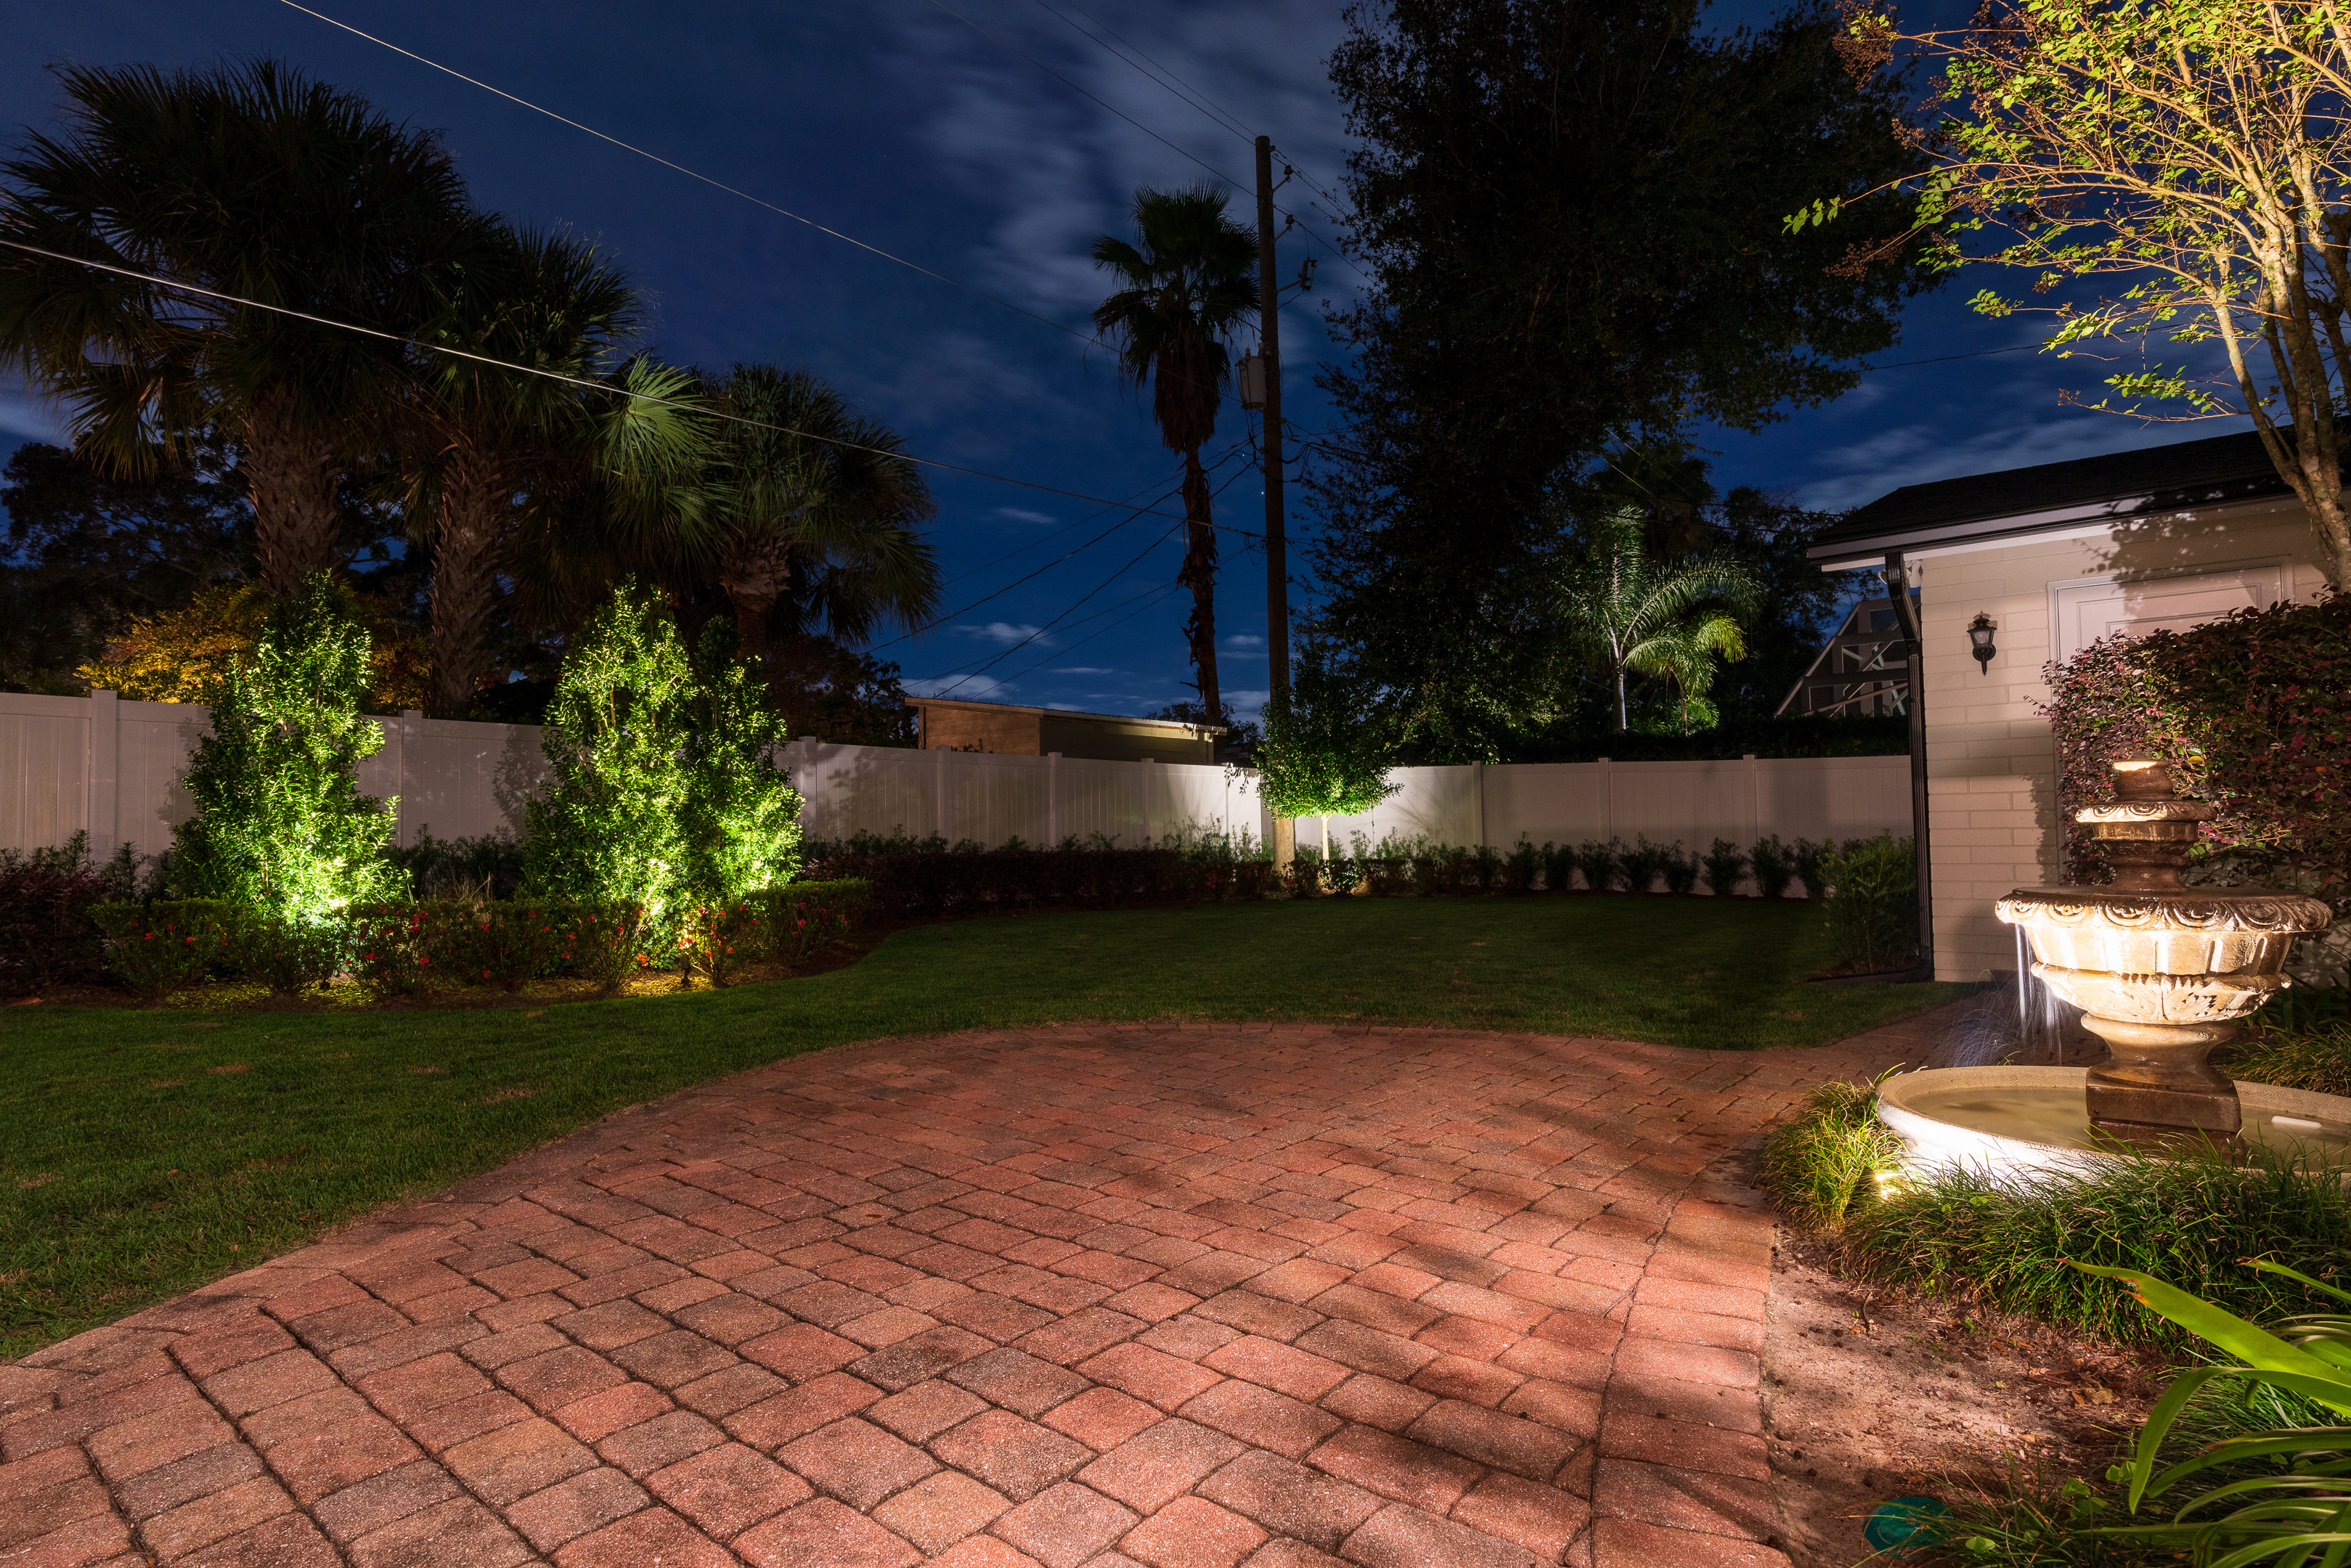 landscape lighting on patio and trees